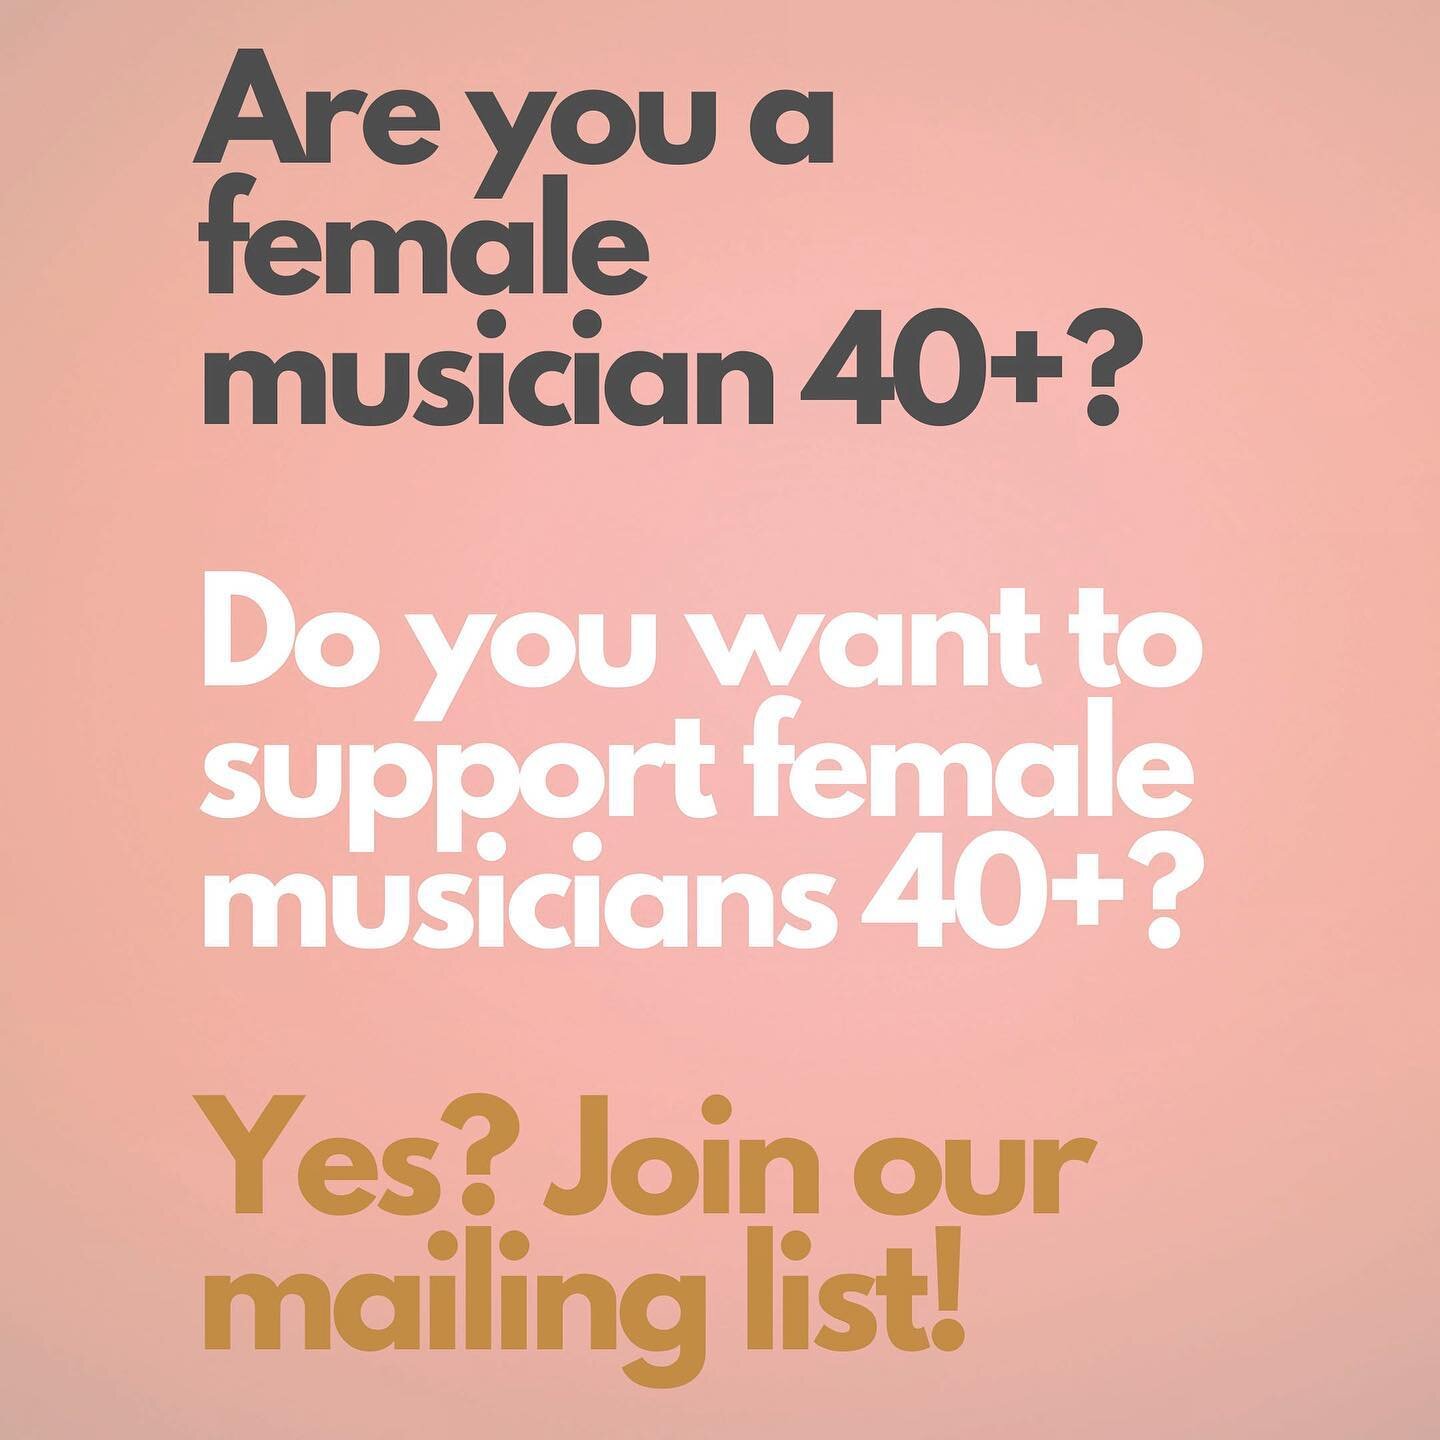 Join The Movement! 🎶
We are Women 40+ Making Waves in Music 

Are you a Female Musician 40+, Fan, Venue or Potential Partner looking to connect with your Community and an Audience that wants to support you?

Wavemakers is setting new standards for t